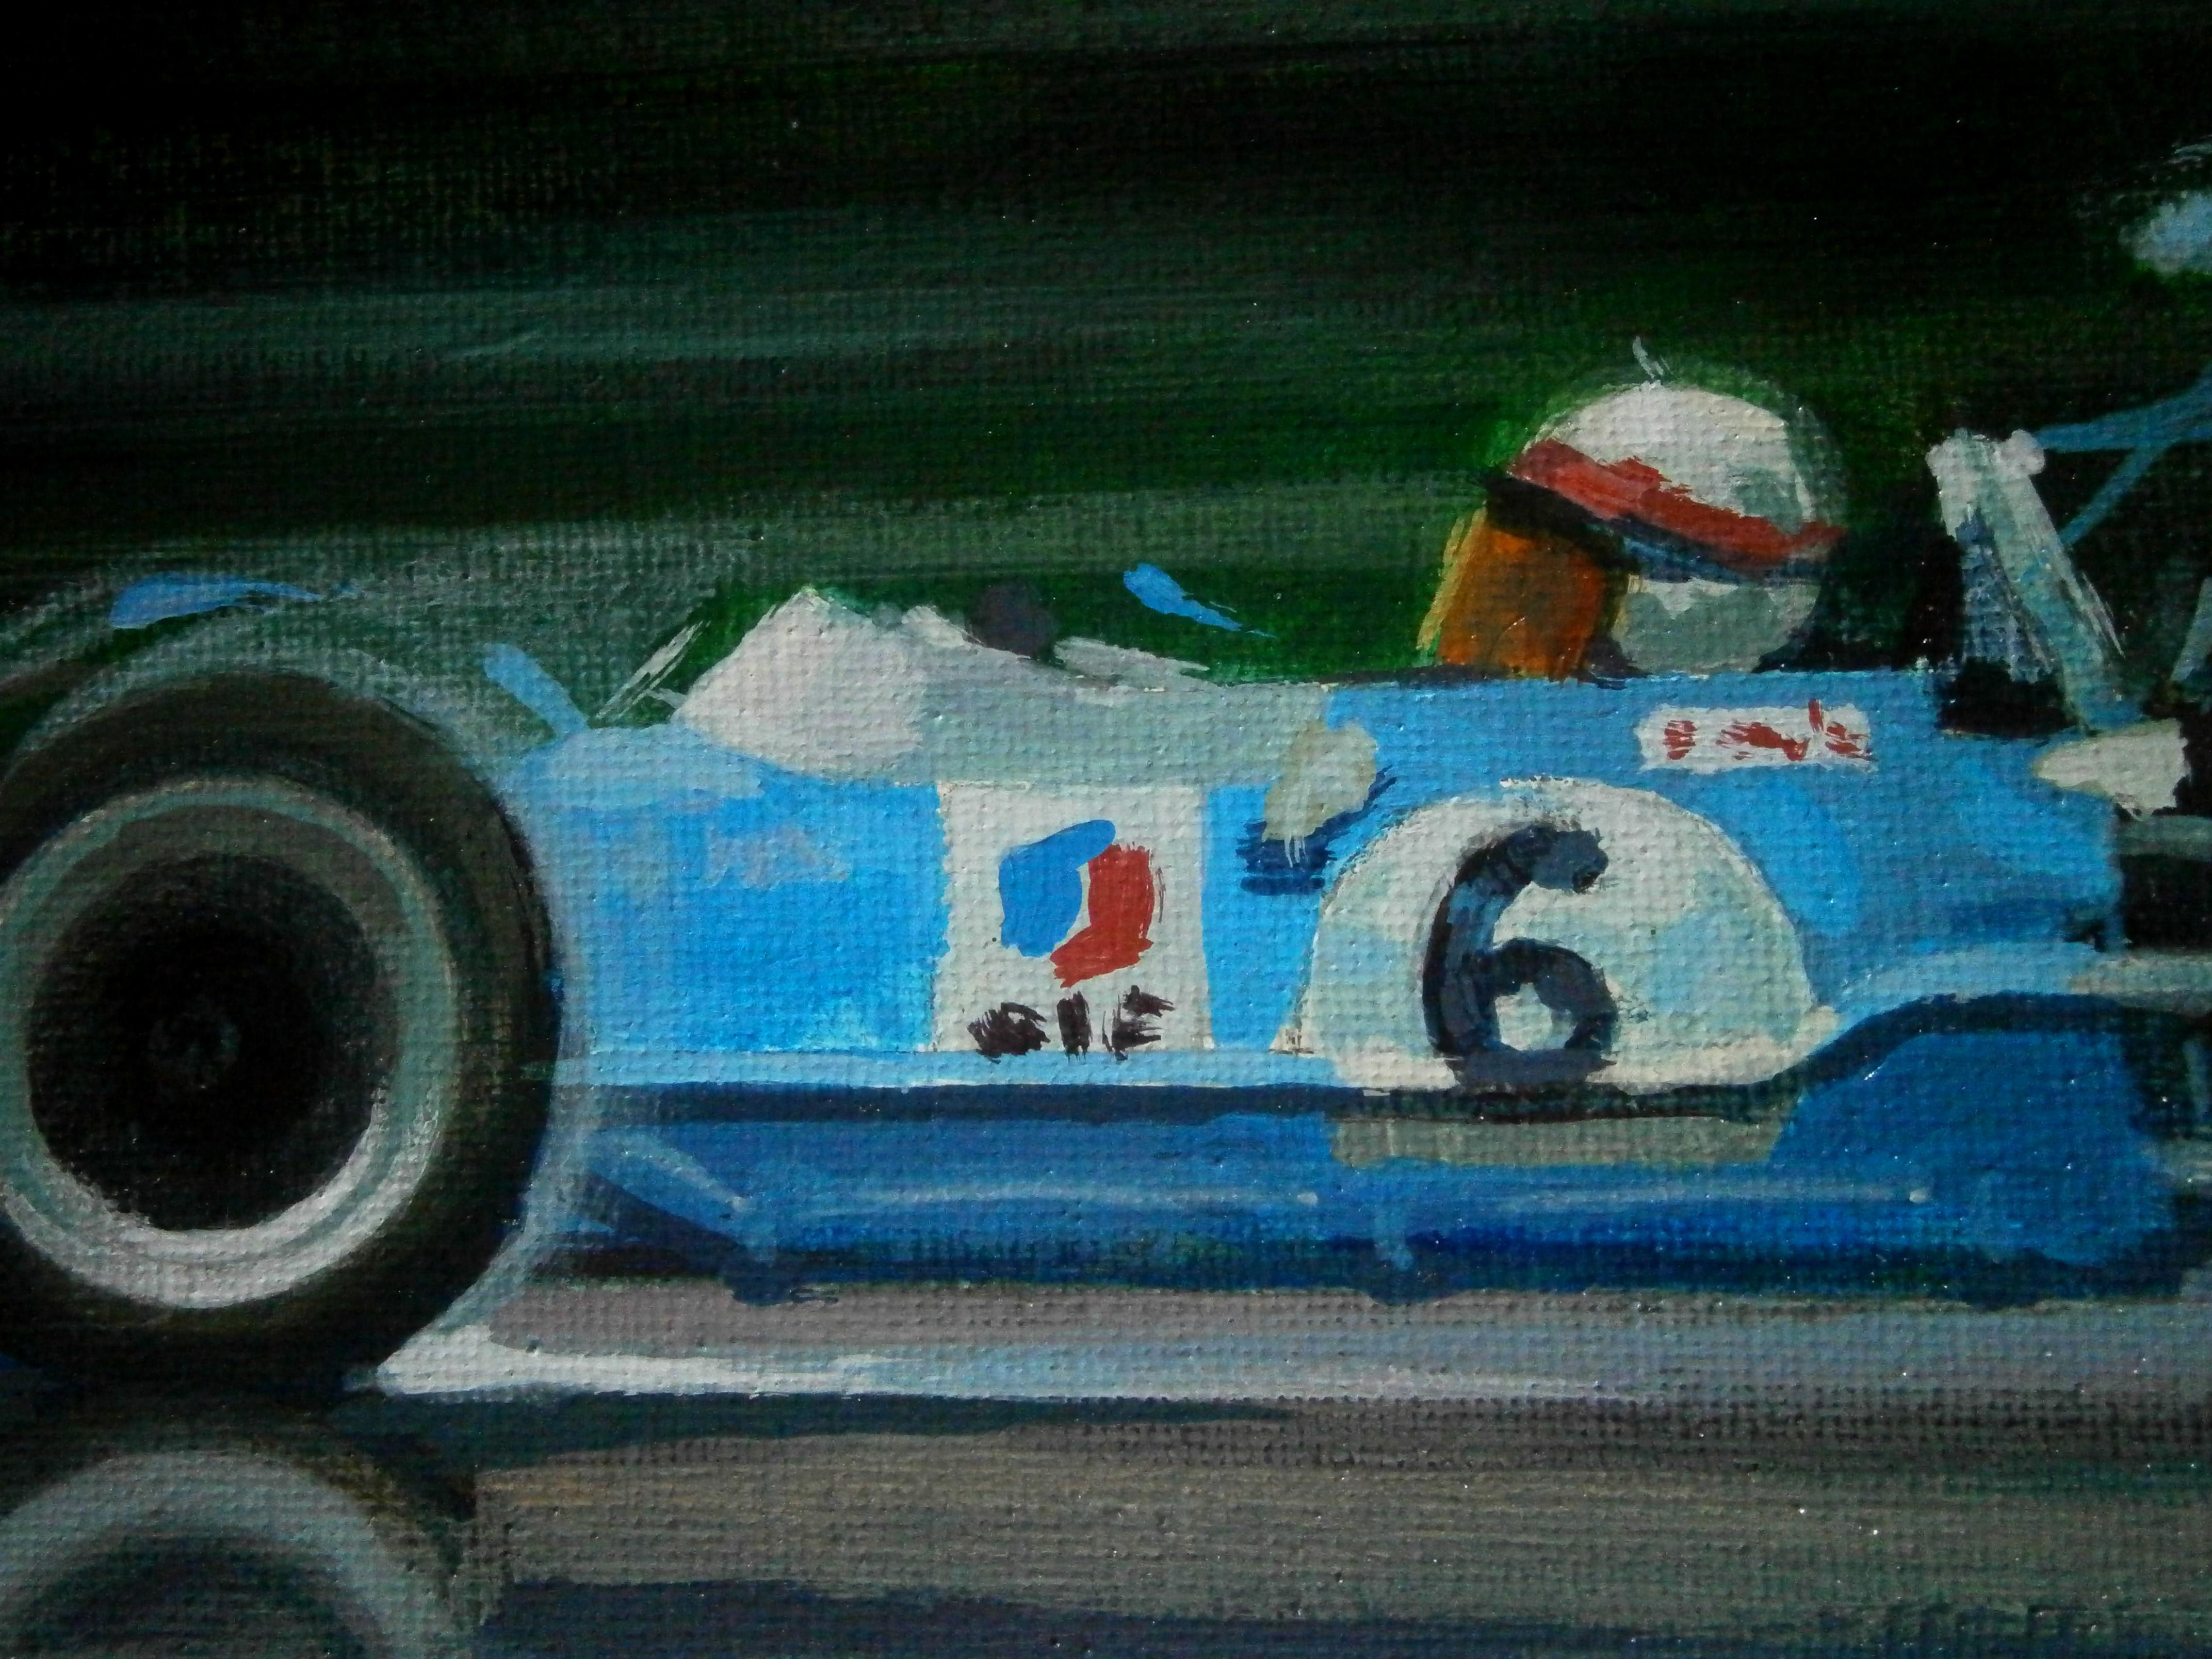 Jackie Stewart. Matra MS10 Ford. Original acrylic painting
During early childhood, Àlex Balaguer began to sketch motorcars symbolic of Maranello’s trademark vehicle.
Self-taught in the art world, Balaguer decided to unite his big love of motoring